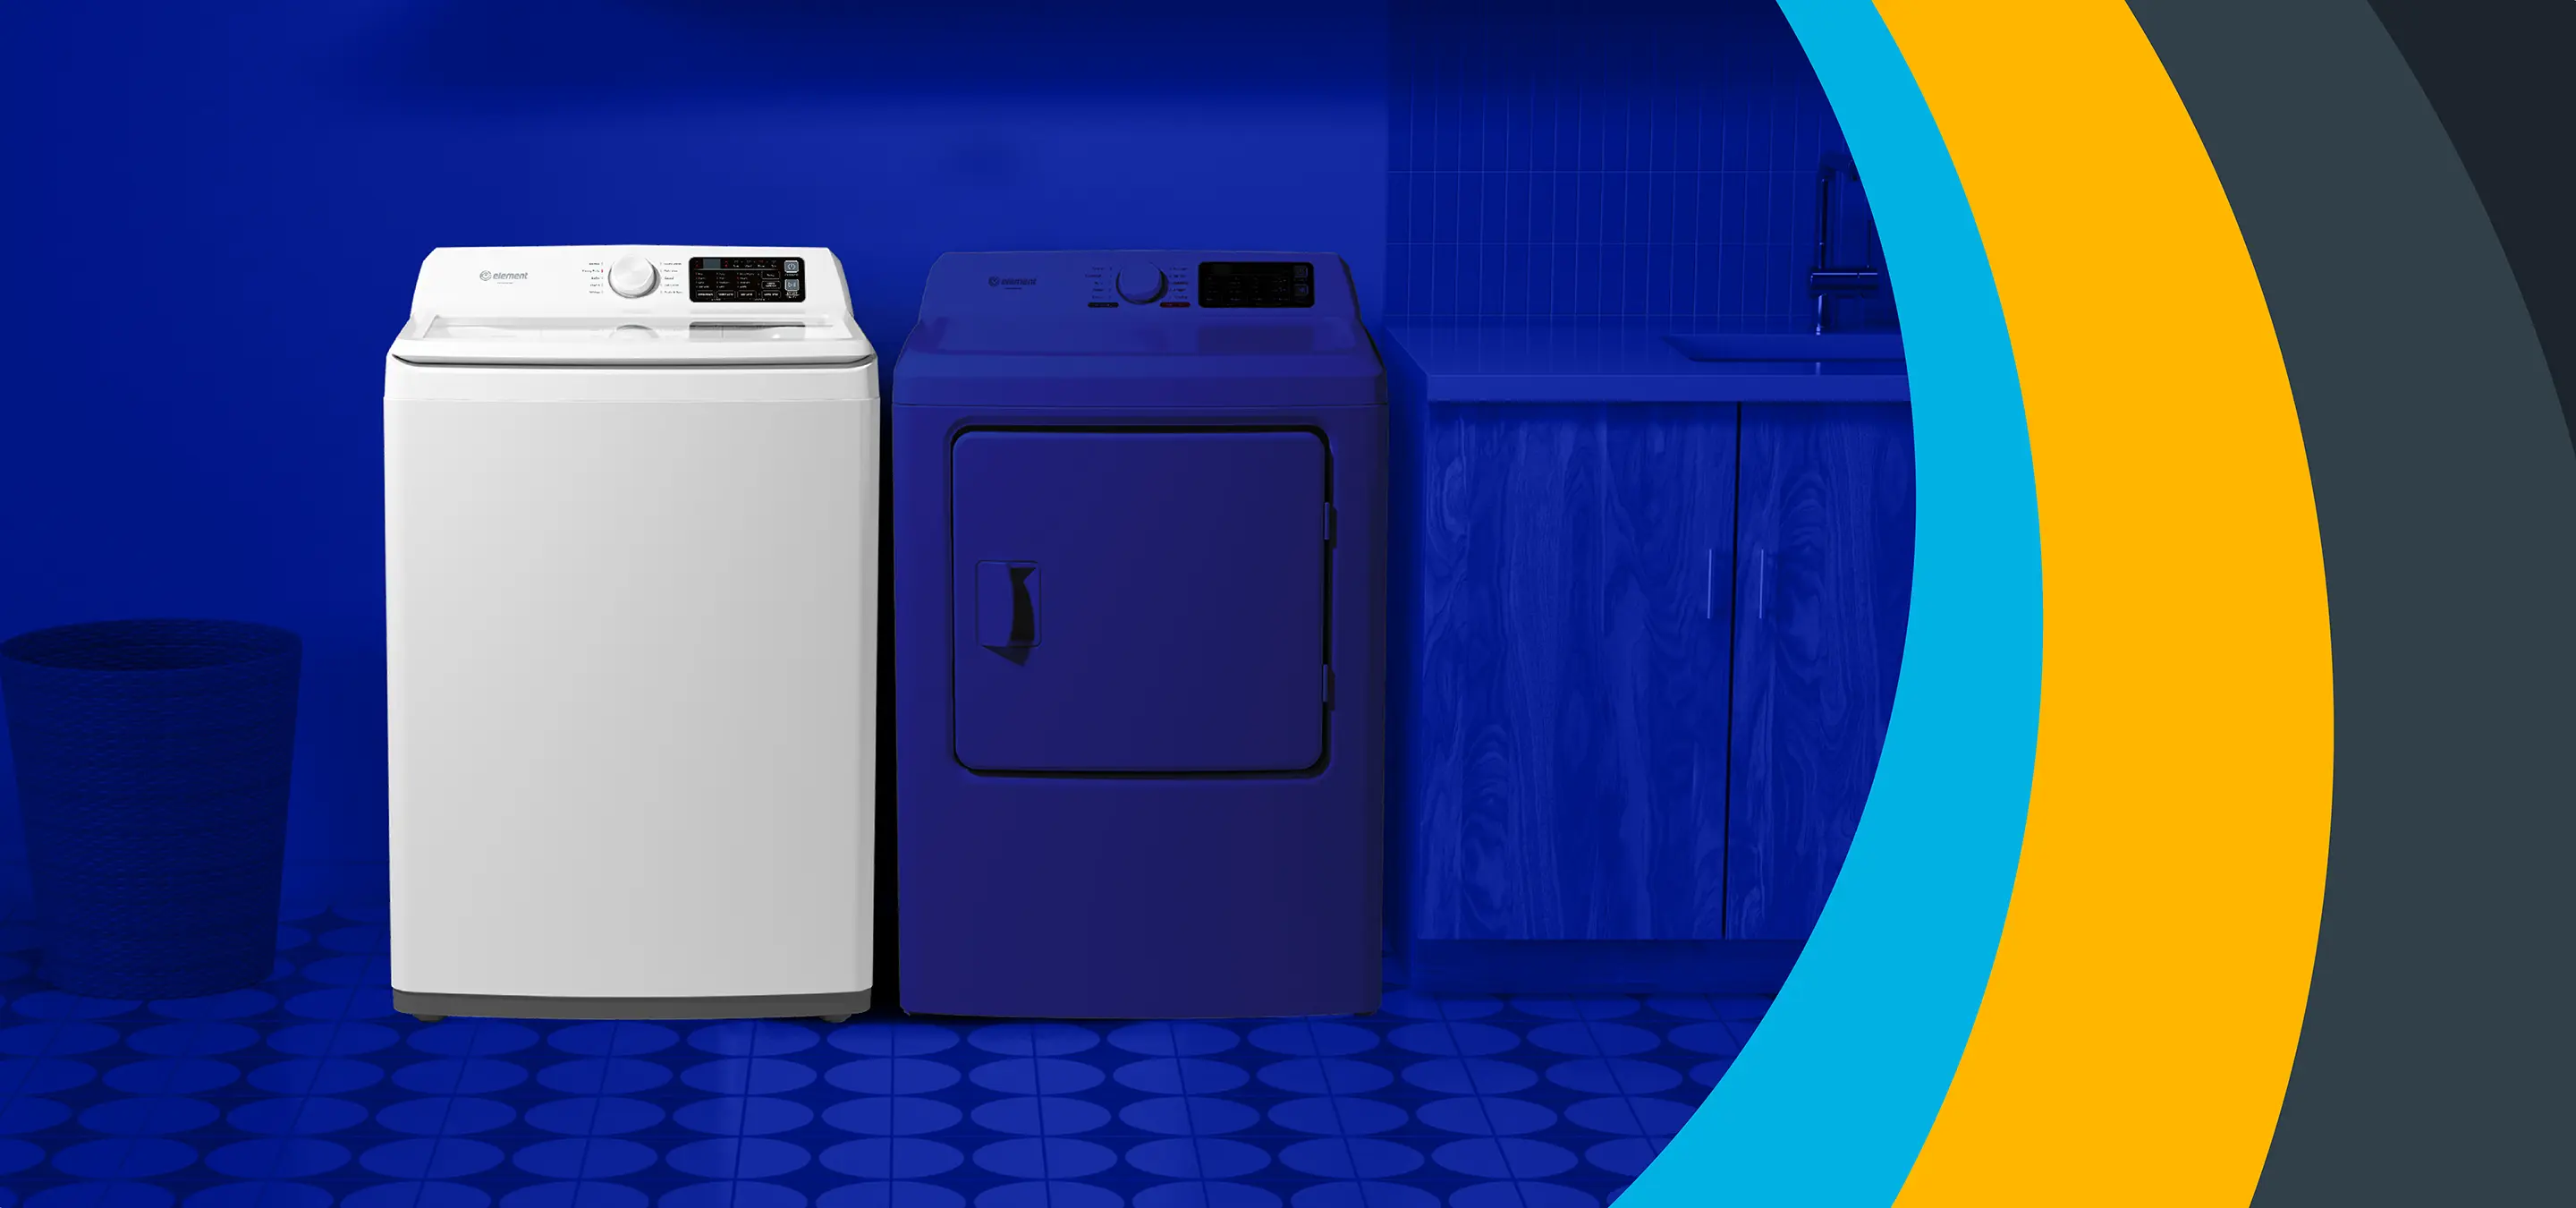 Element washer and dryer in blue laundry room environment